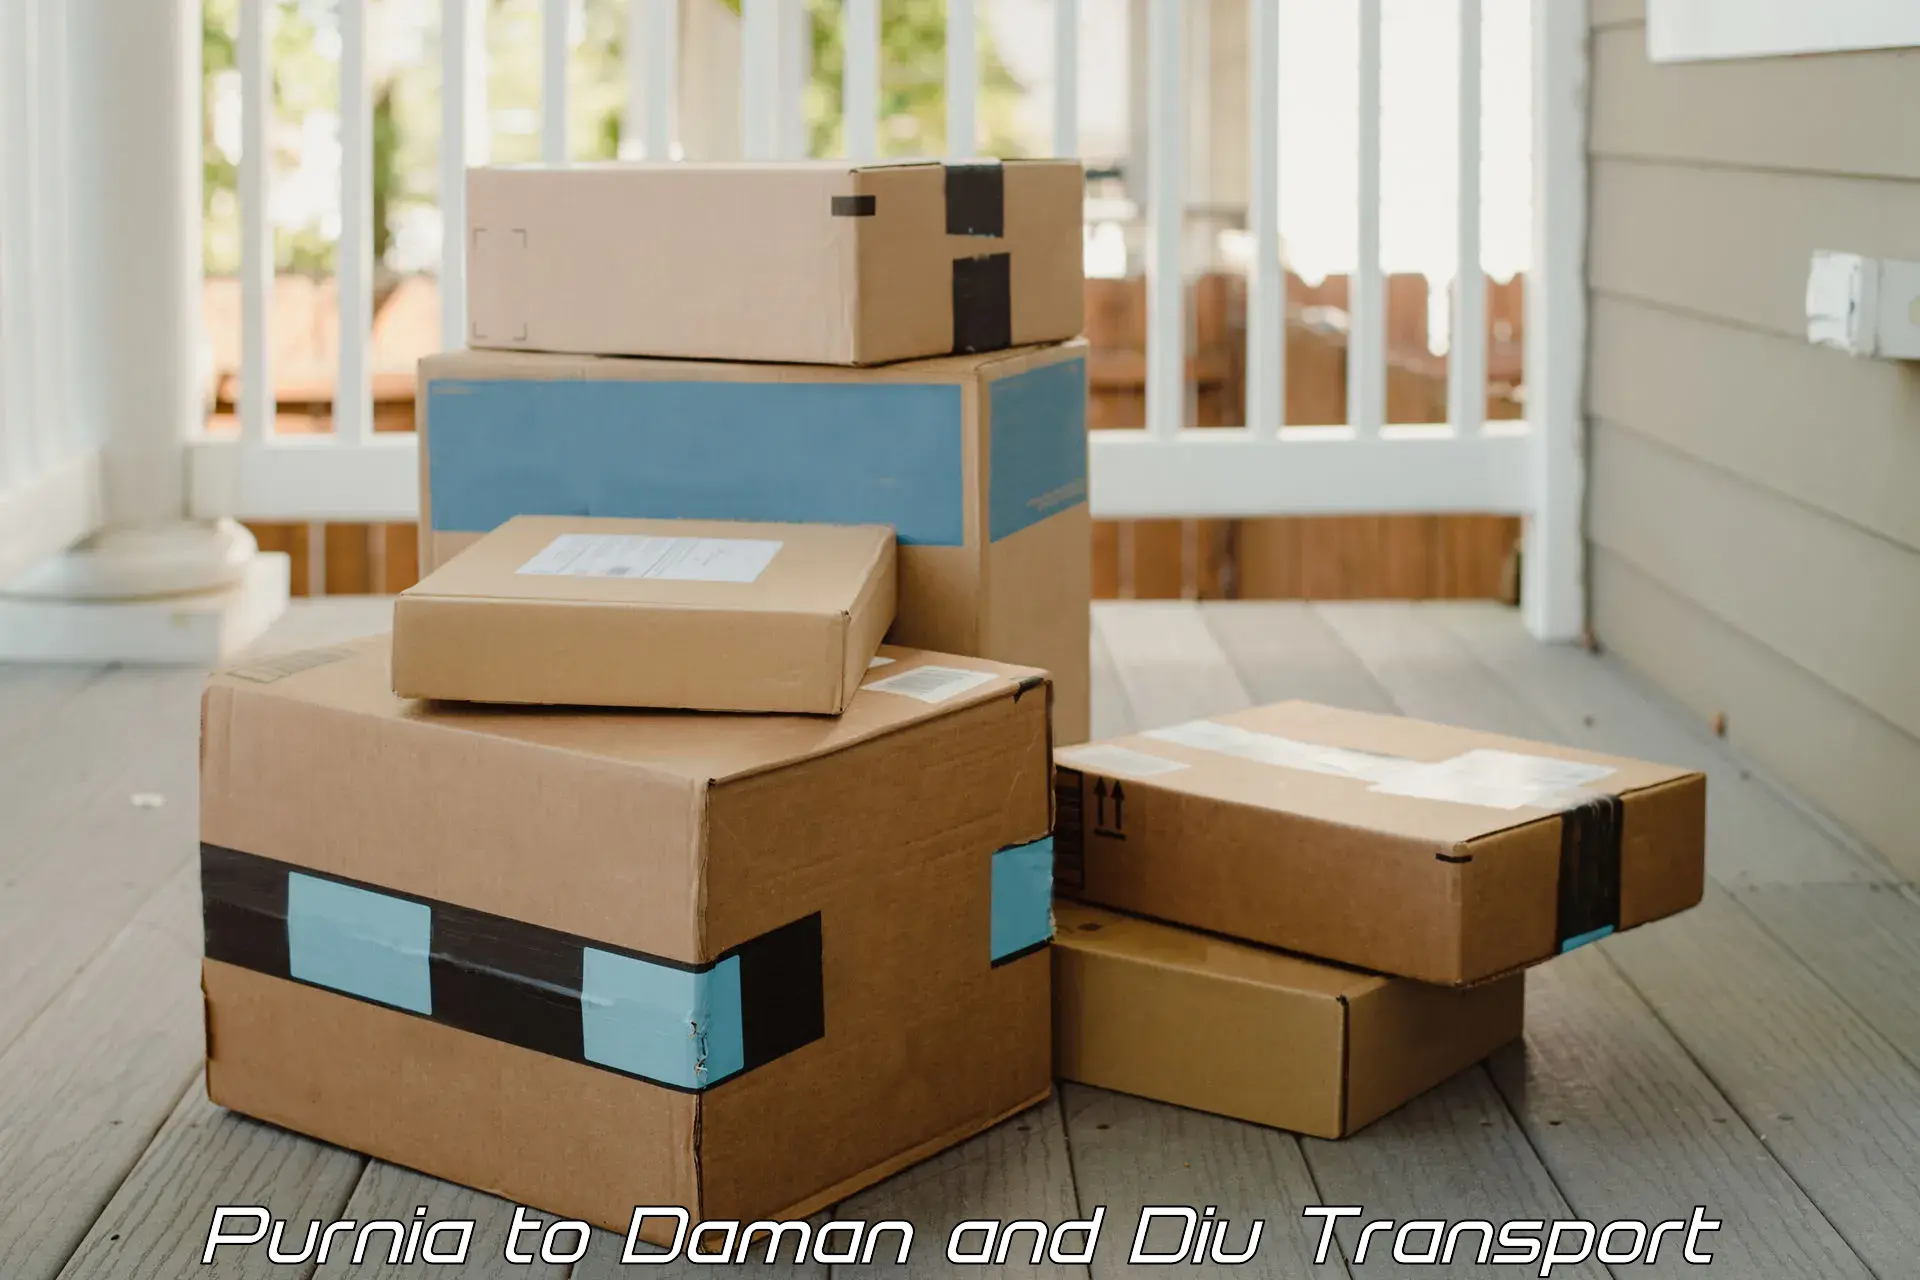 Container transport service Purnia to Daman and Diu